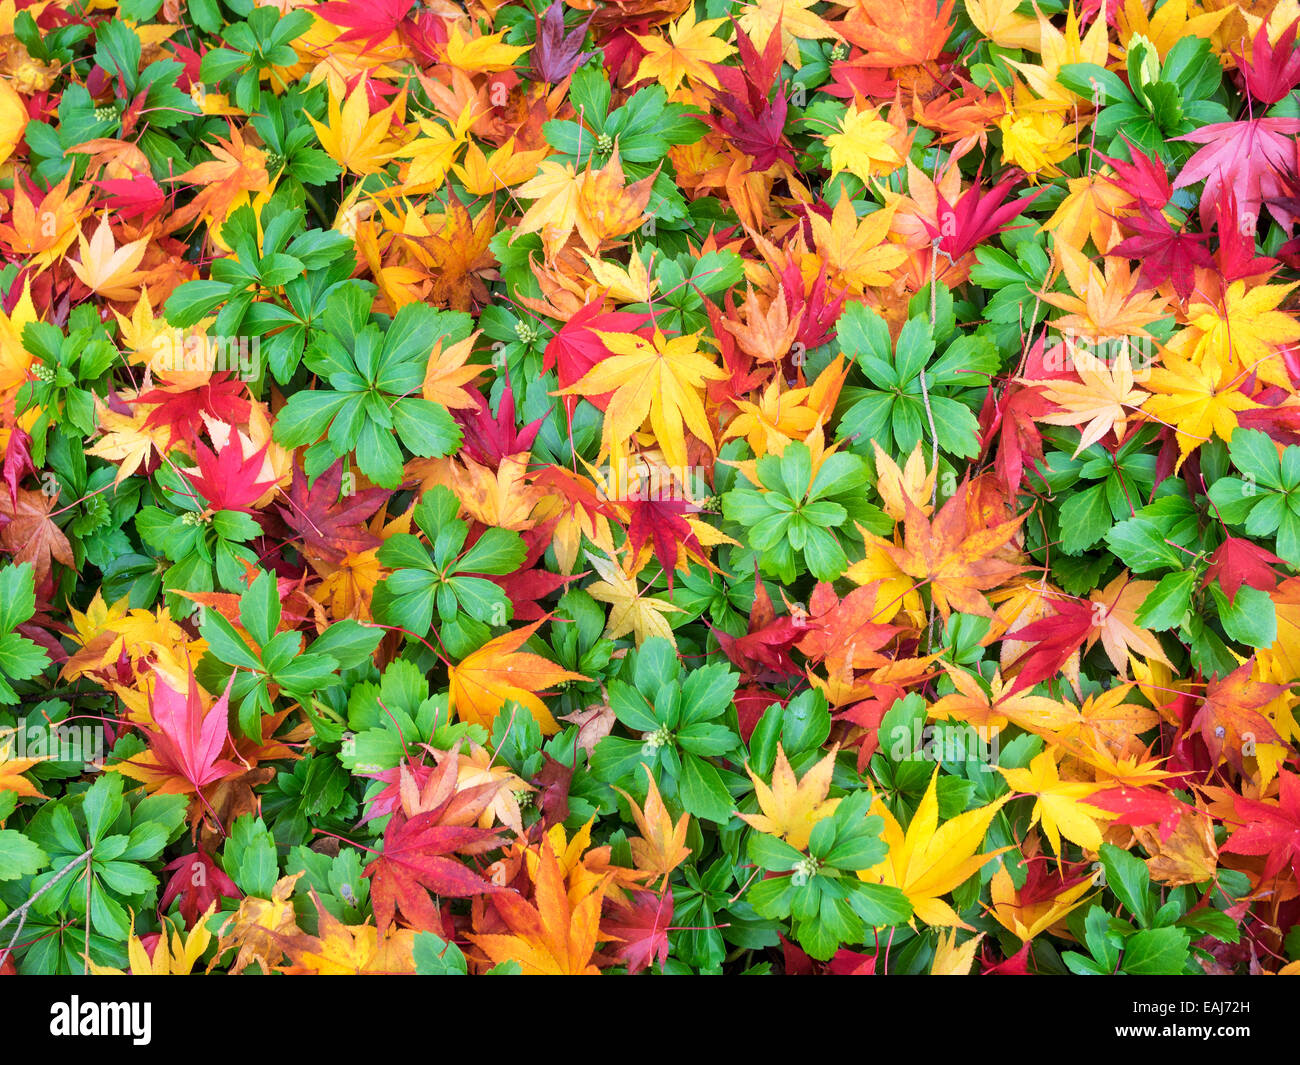 Japanese maple leaves Acer palmatum create a yellow orange and red pattern atop bright evergreen Japanese Pachysandra terminalis Stock Photo